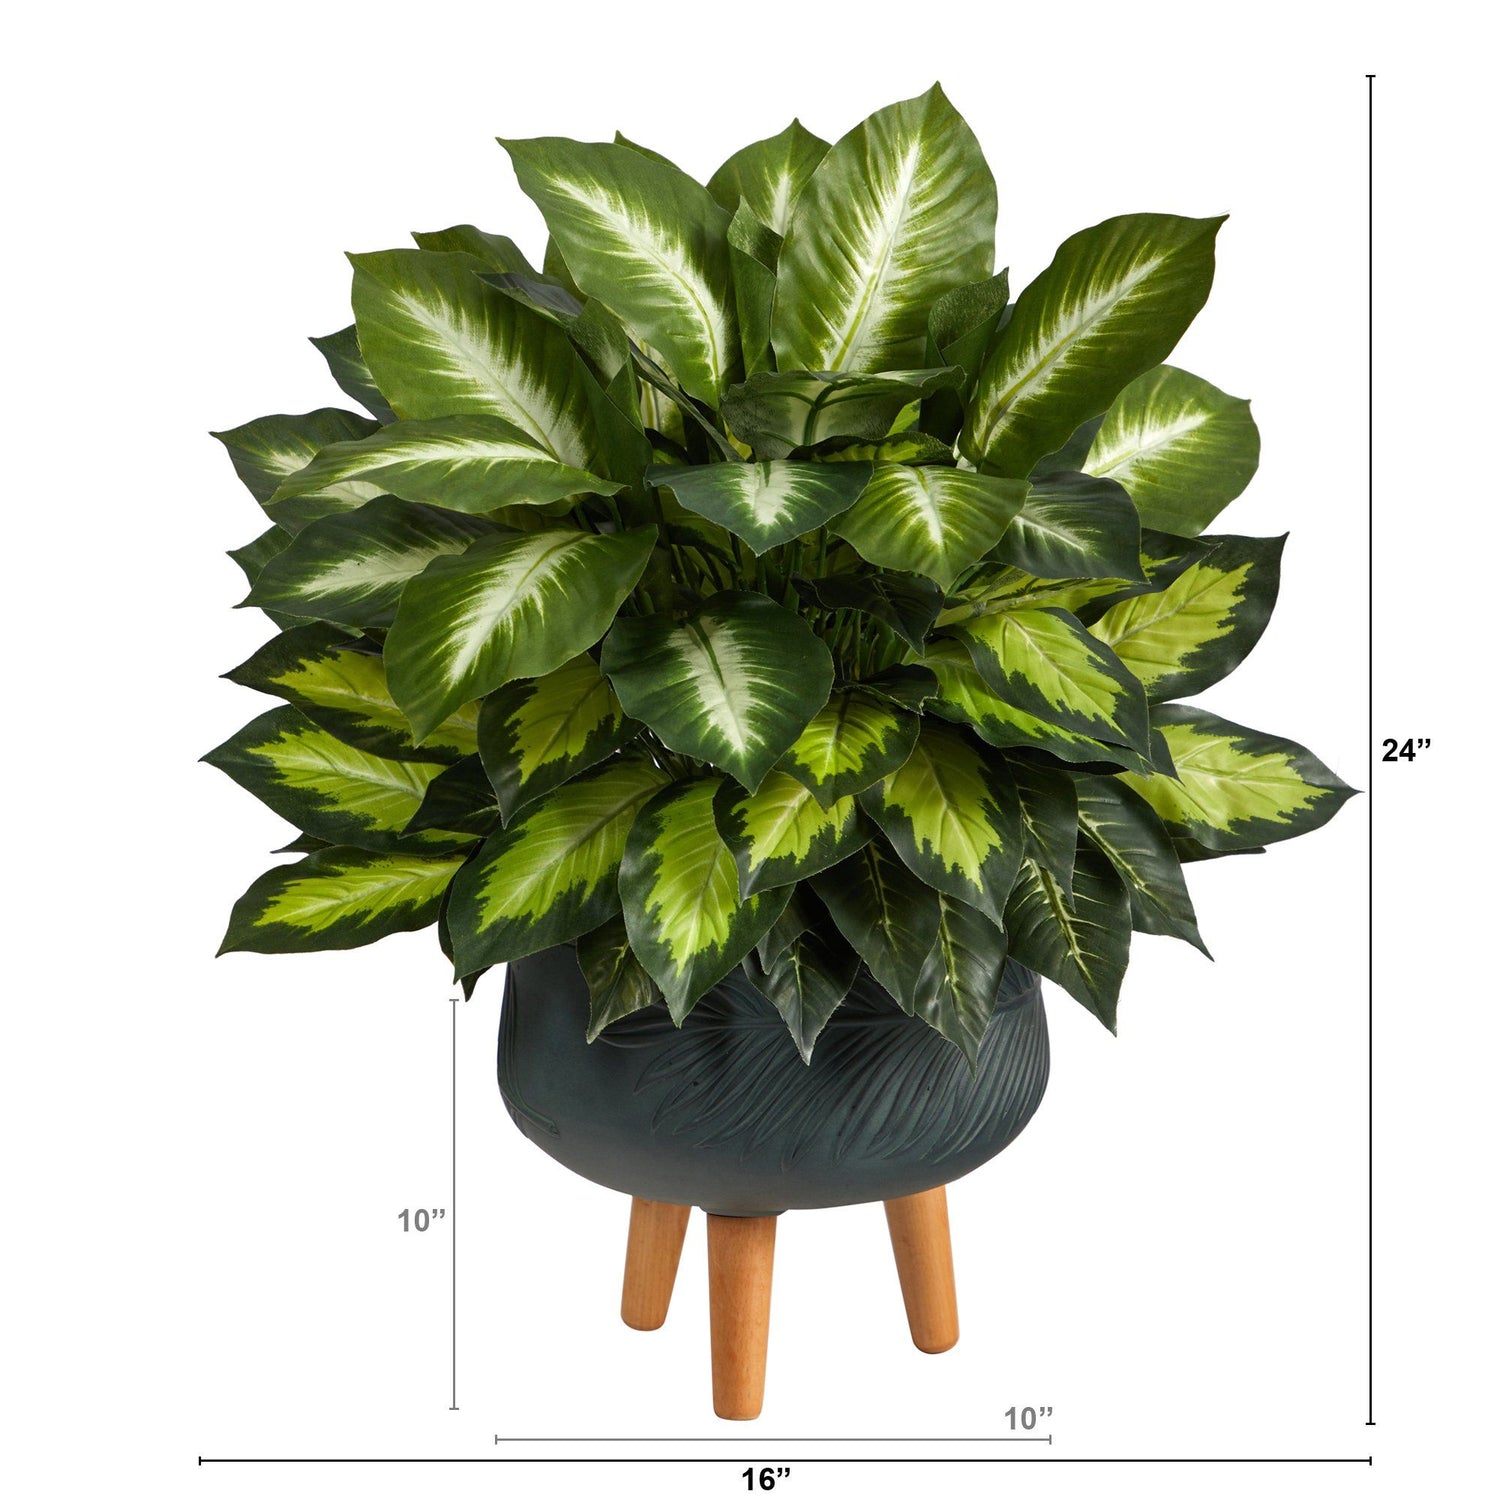 2’ Golden Dieffenbachia Artificial Plant in Black Planter with Stand